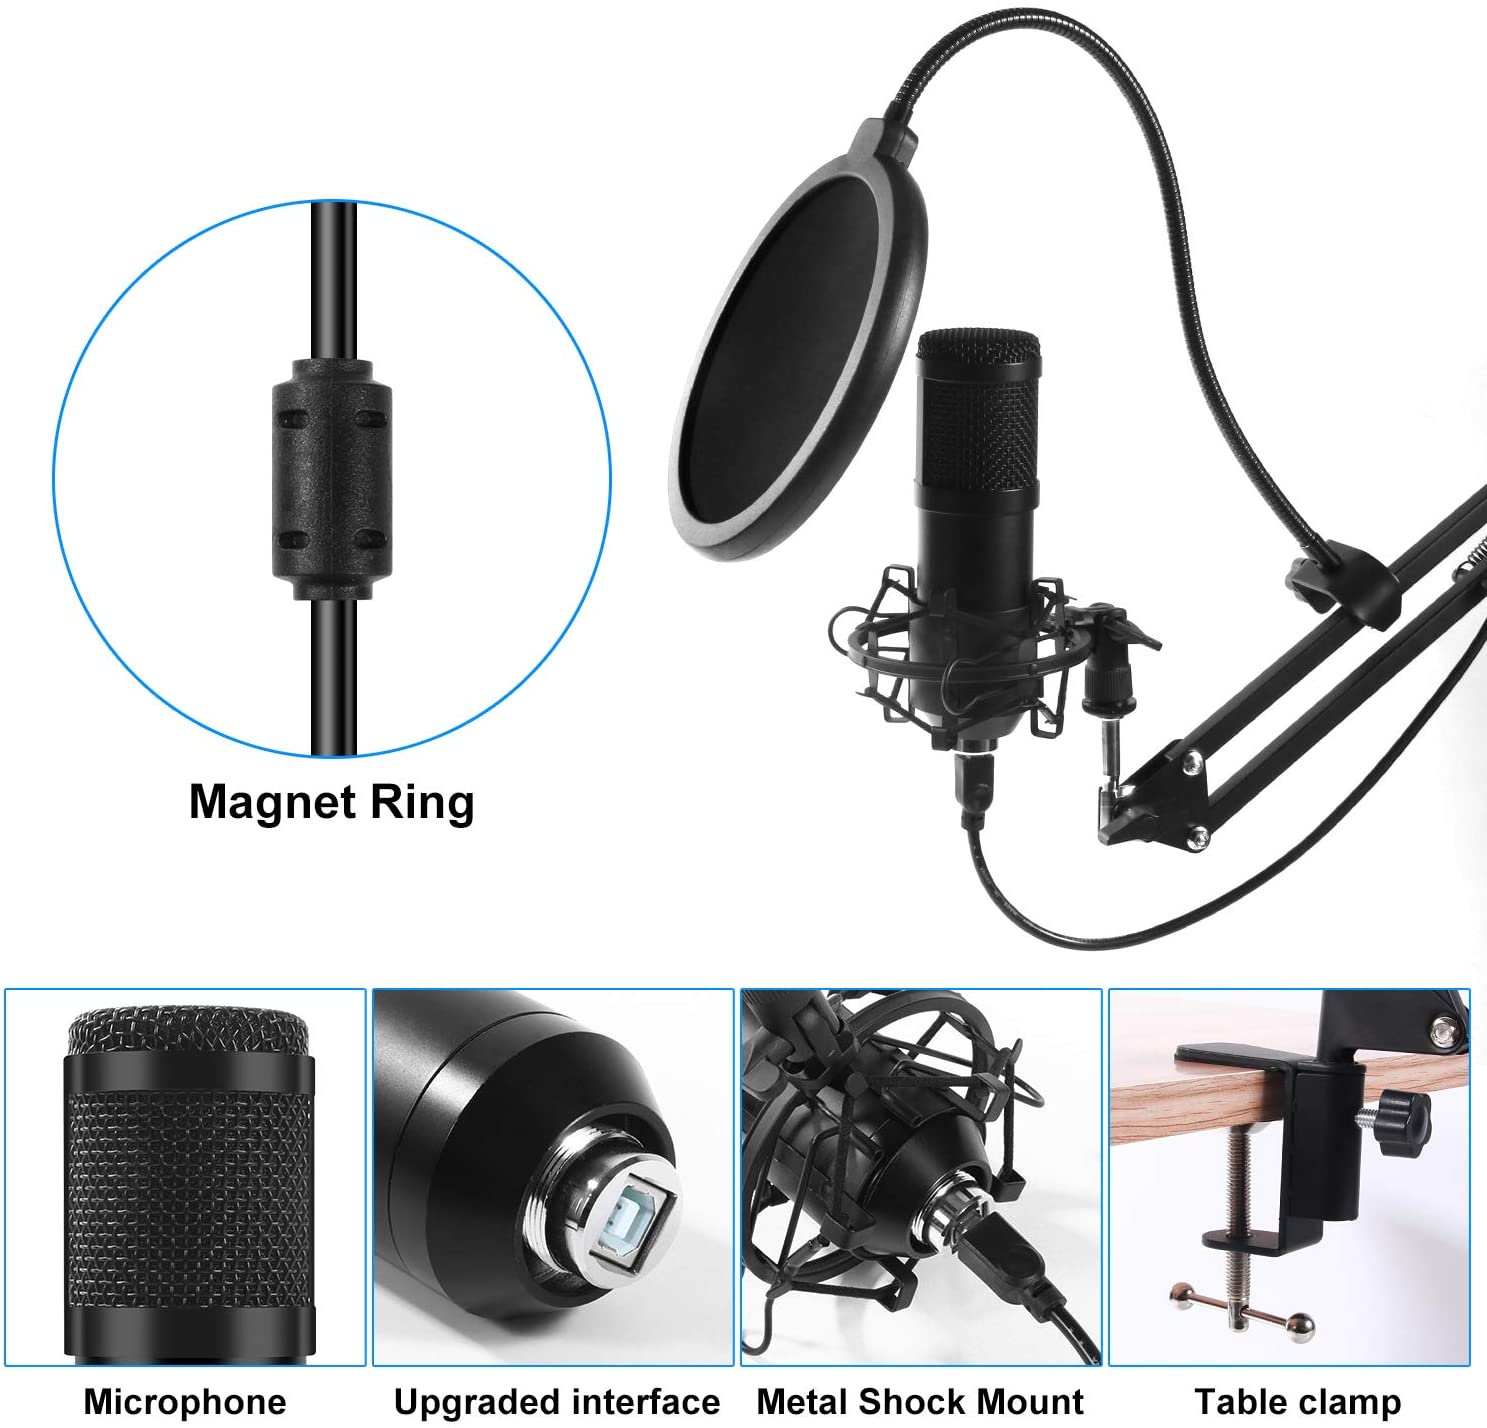 USB Condenser Microphone for Computer PC 192KHZ/24BIT Professional Cardioid Microphone Kit with Adjustable Scissor Arm Stand Shock Mount Pop Filter for Karaoke, YouTube, Gaming Recording - image 3 of 8